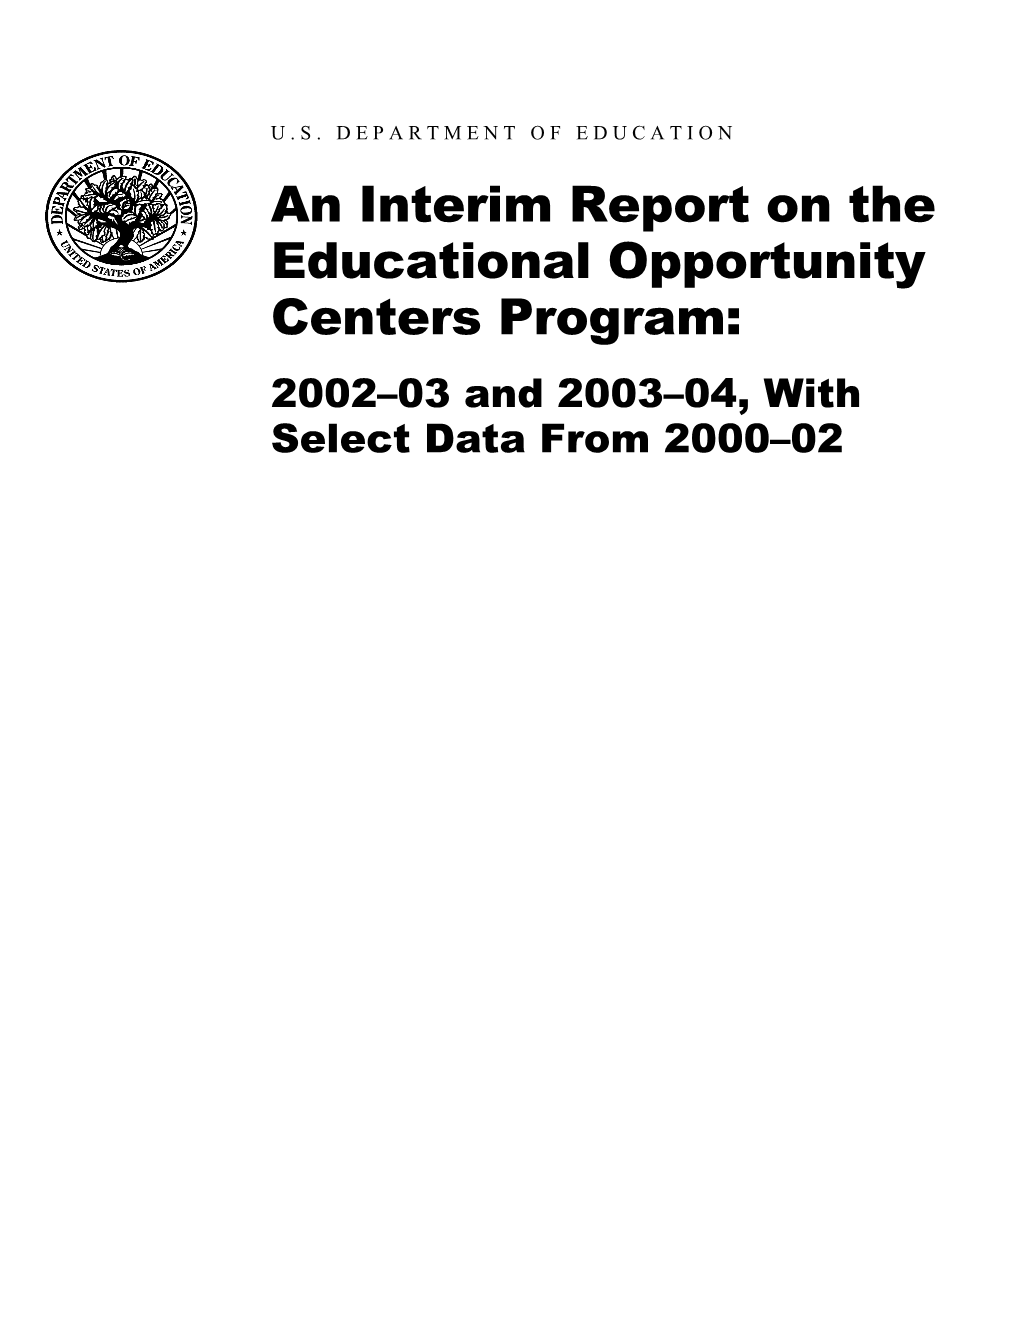 An Interim Report on the Educational Opportunity Centers Program: 2002 03 and 2003 04